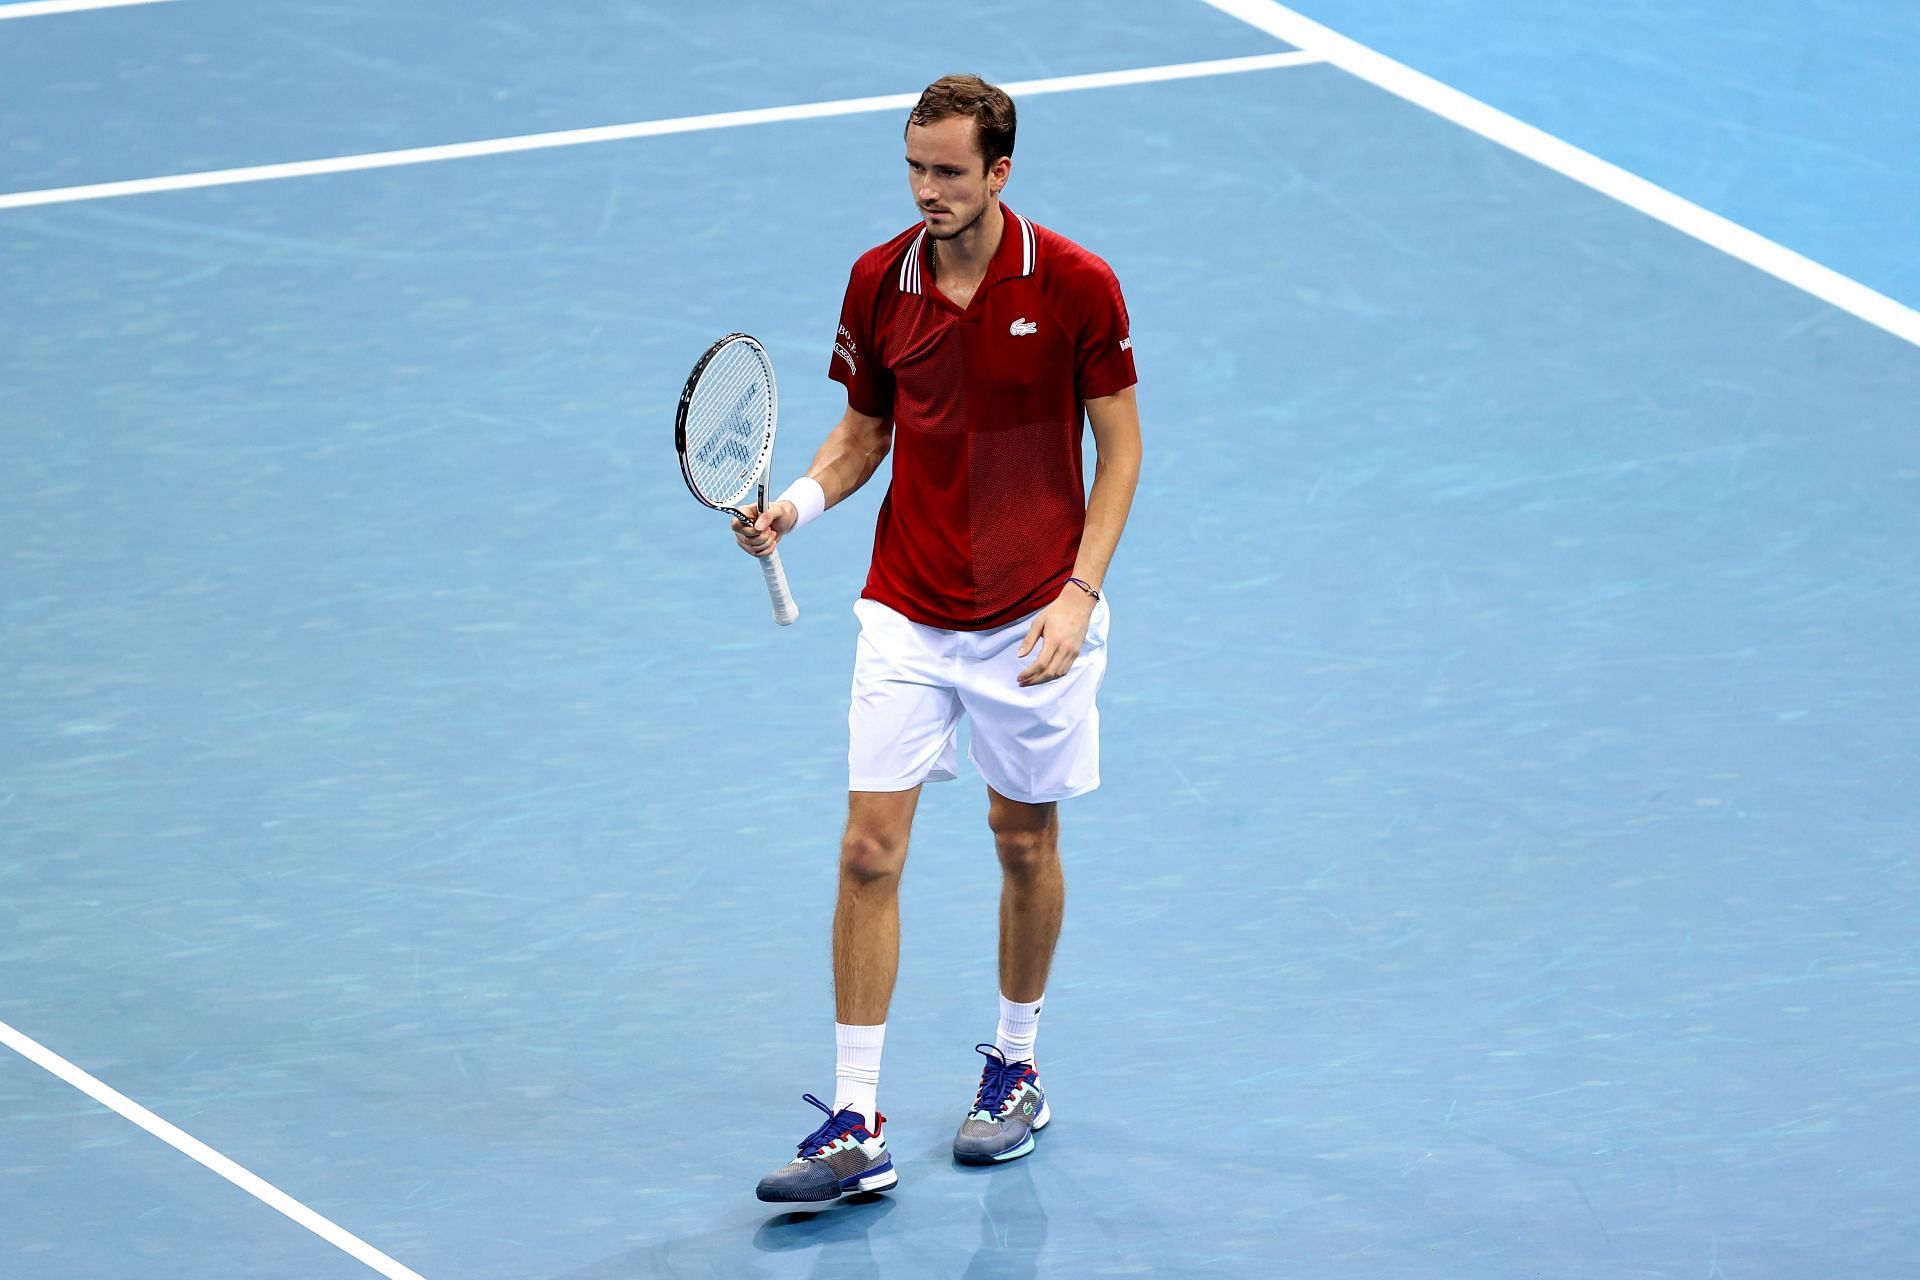 Medvedev helped Russia clinch their spot in the ATP Cup semifinals